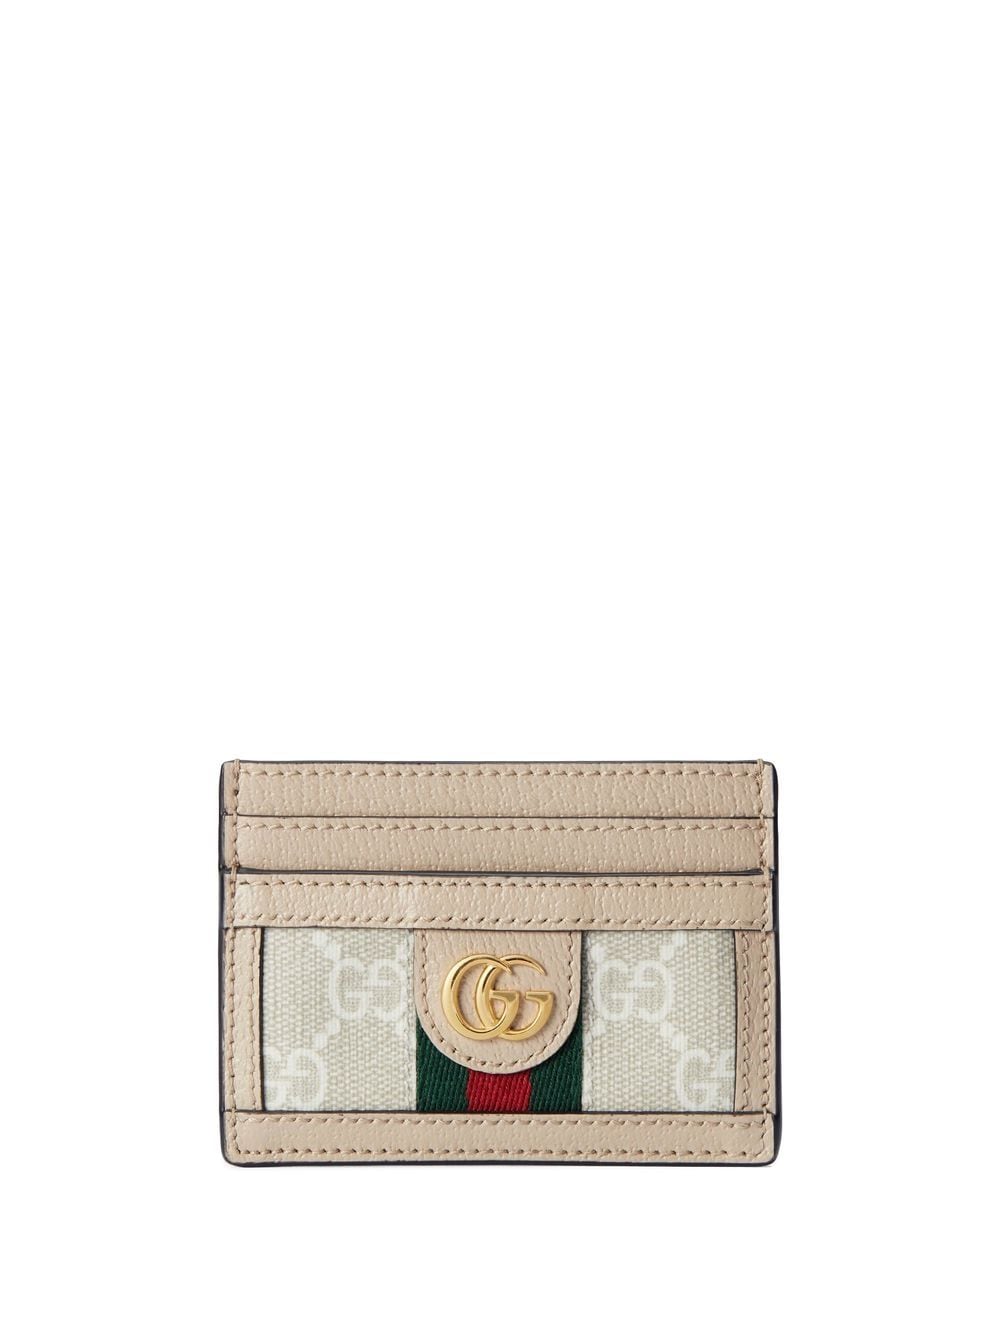 Gucci Ophidia GG card case - White